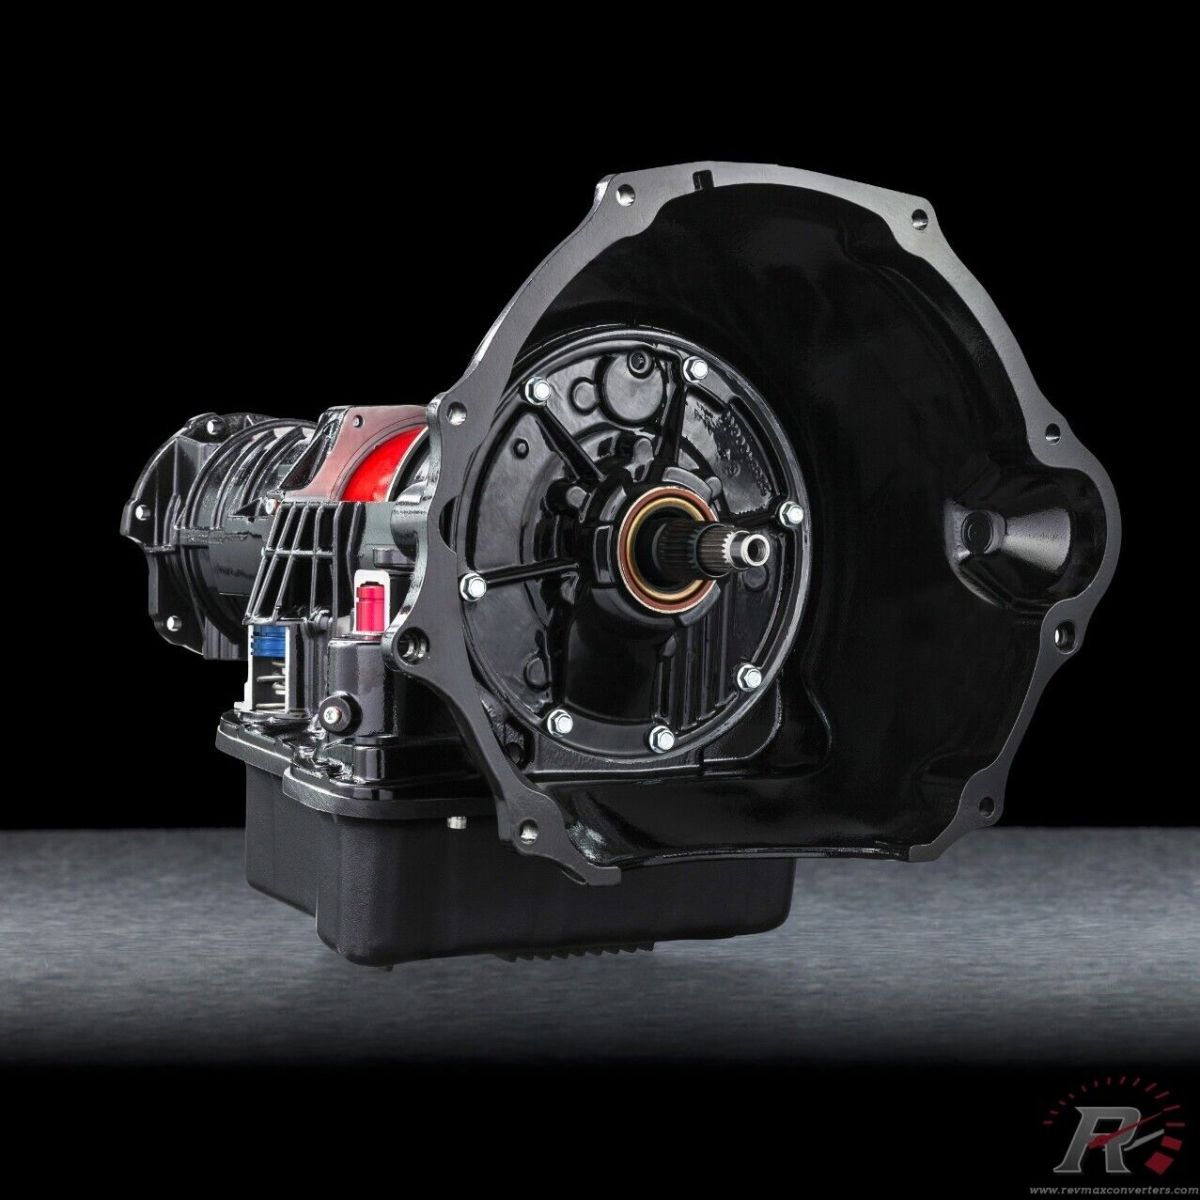 Revmax - RevMax Signature Series Transmission For 03-07 Dodge 2500/3500 5.9L Cummins With 48RE Transmission